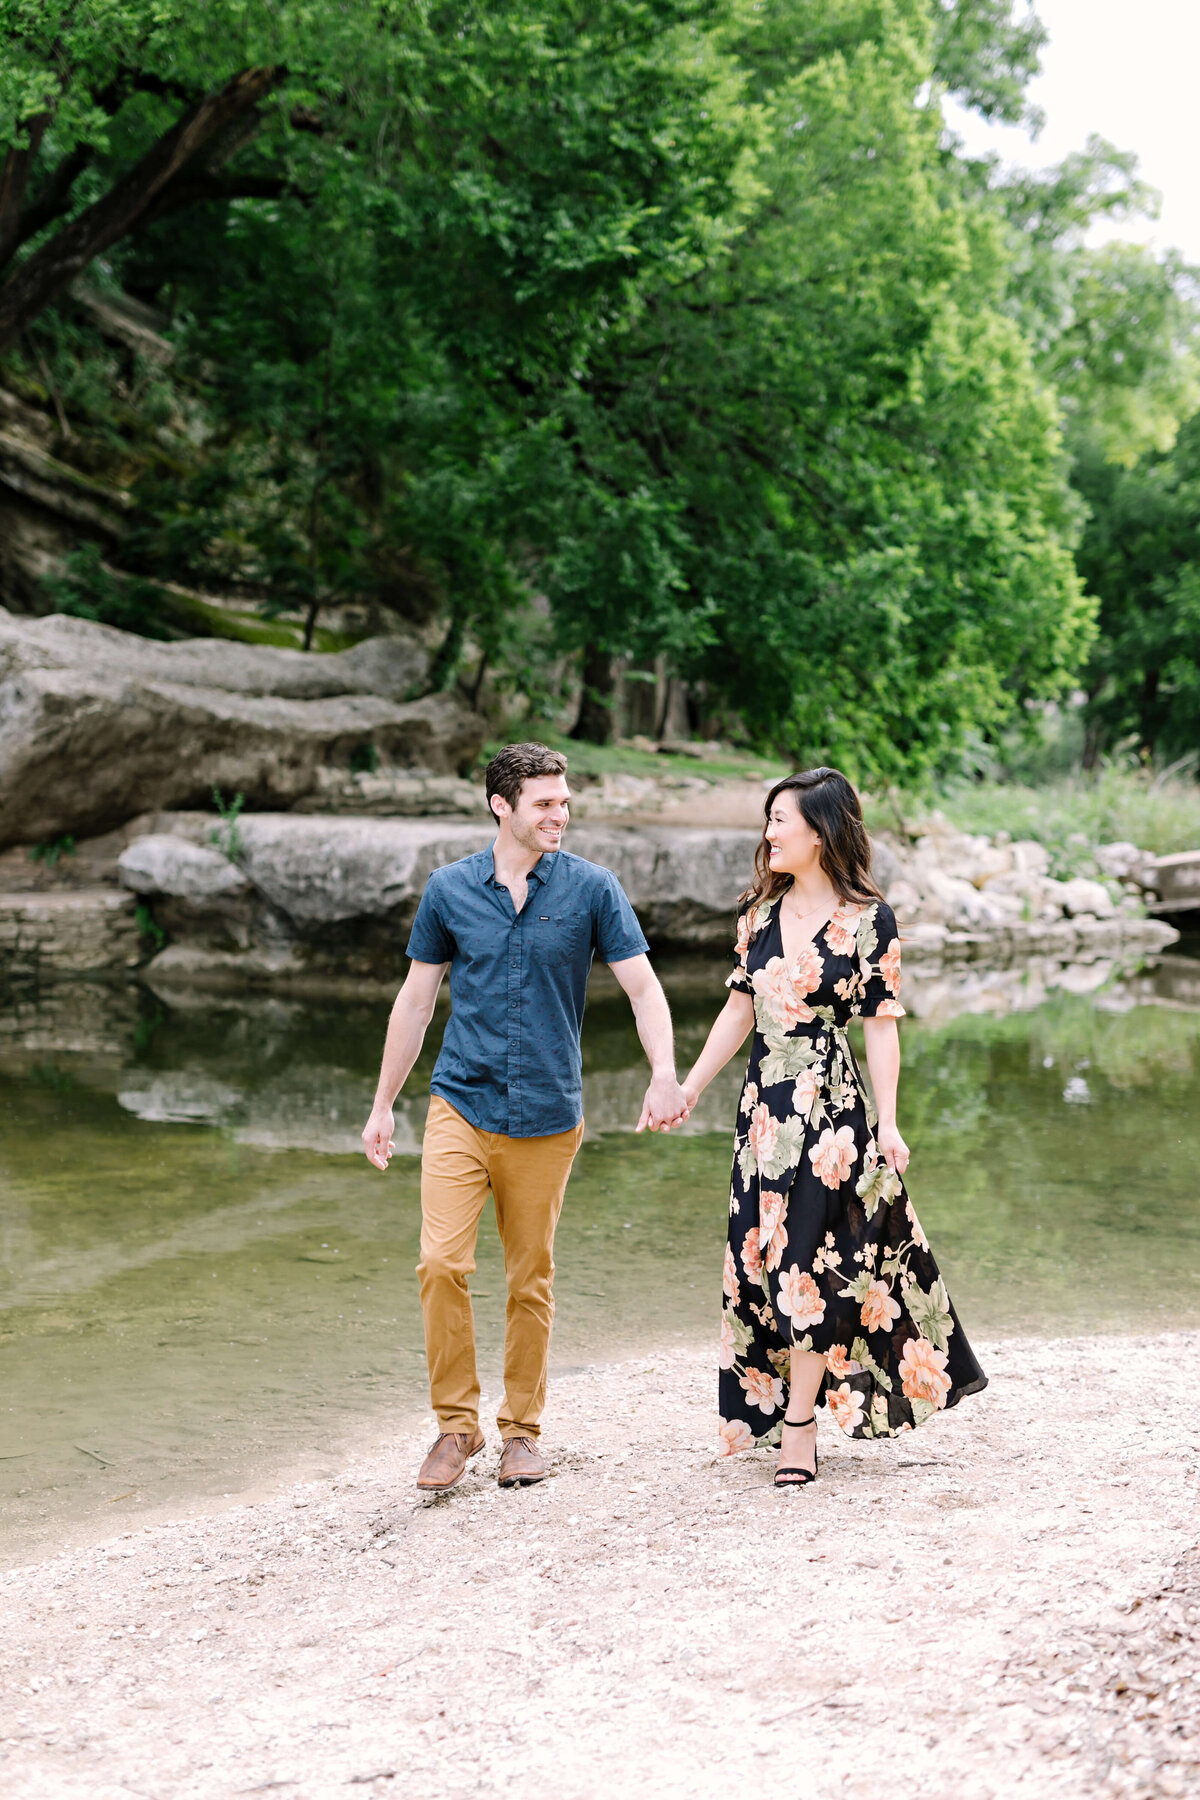 Angela and Eric’s portrait session at Bull Creek Park in Austin, Texas